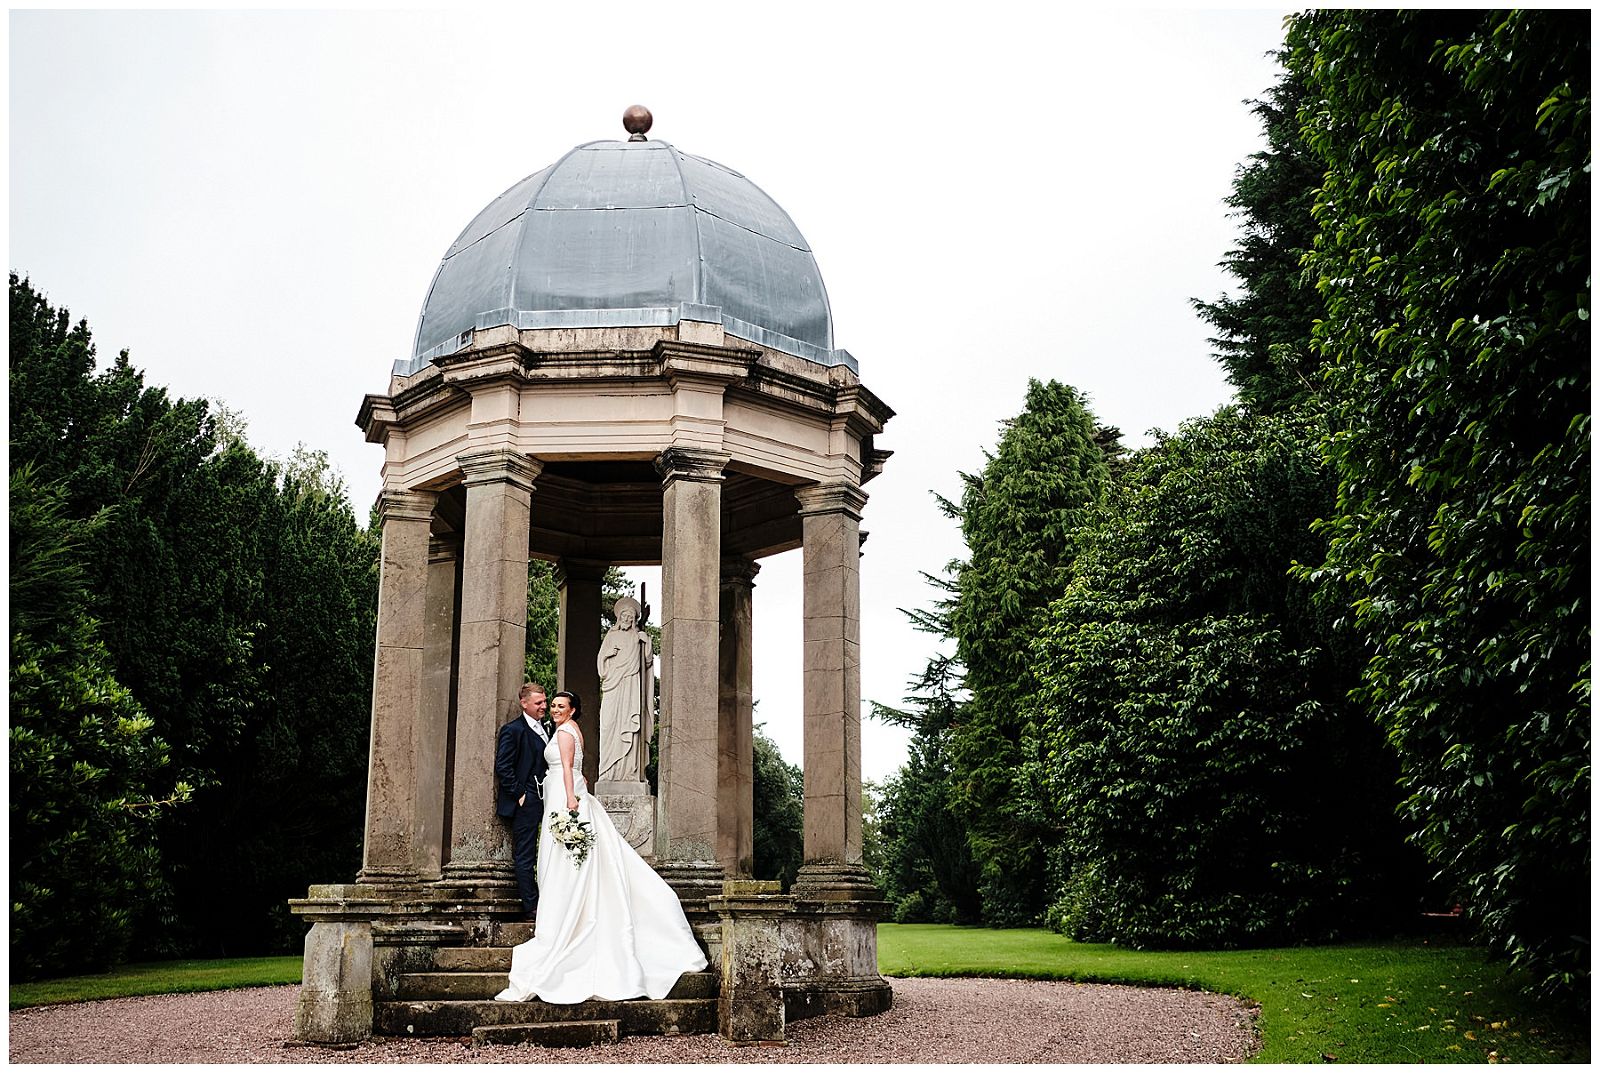 Using the character of the grounds to add beautiful scenes for the couples portraits at Hawkstone Hall in Shrewsbury by Documentary Wedding Photographer Stuart James